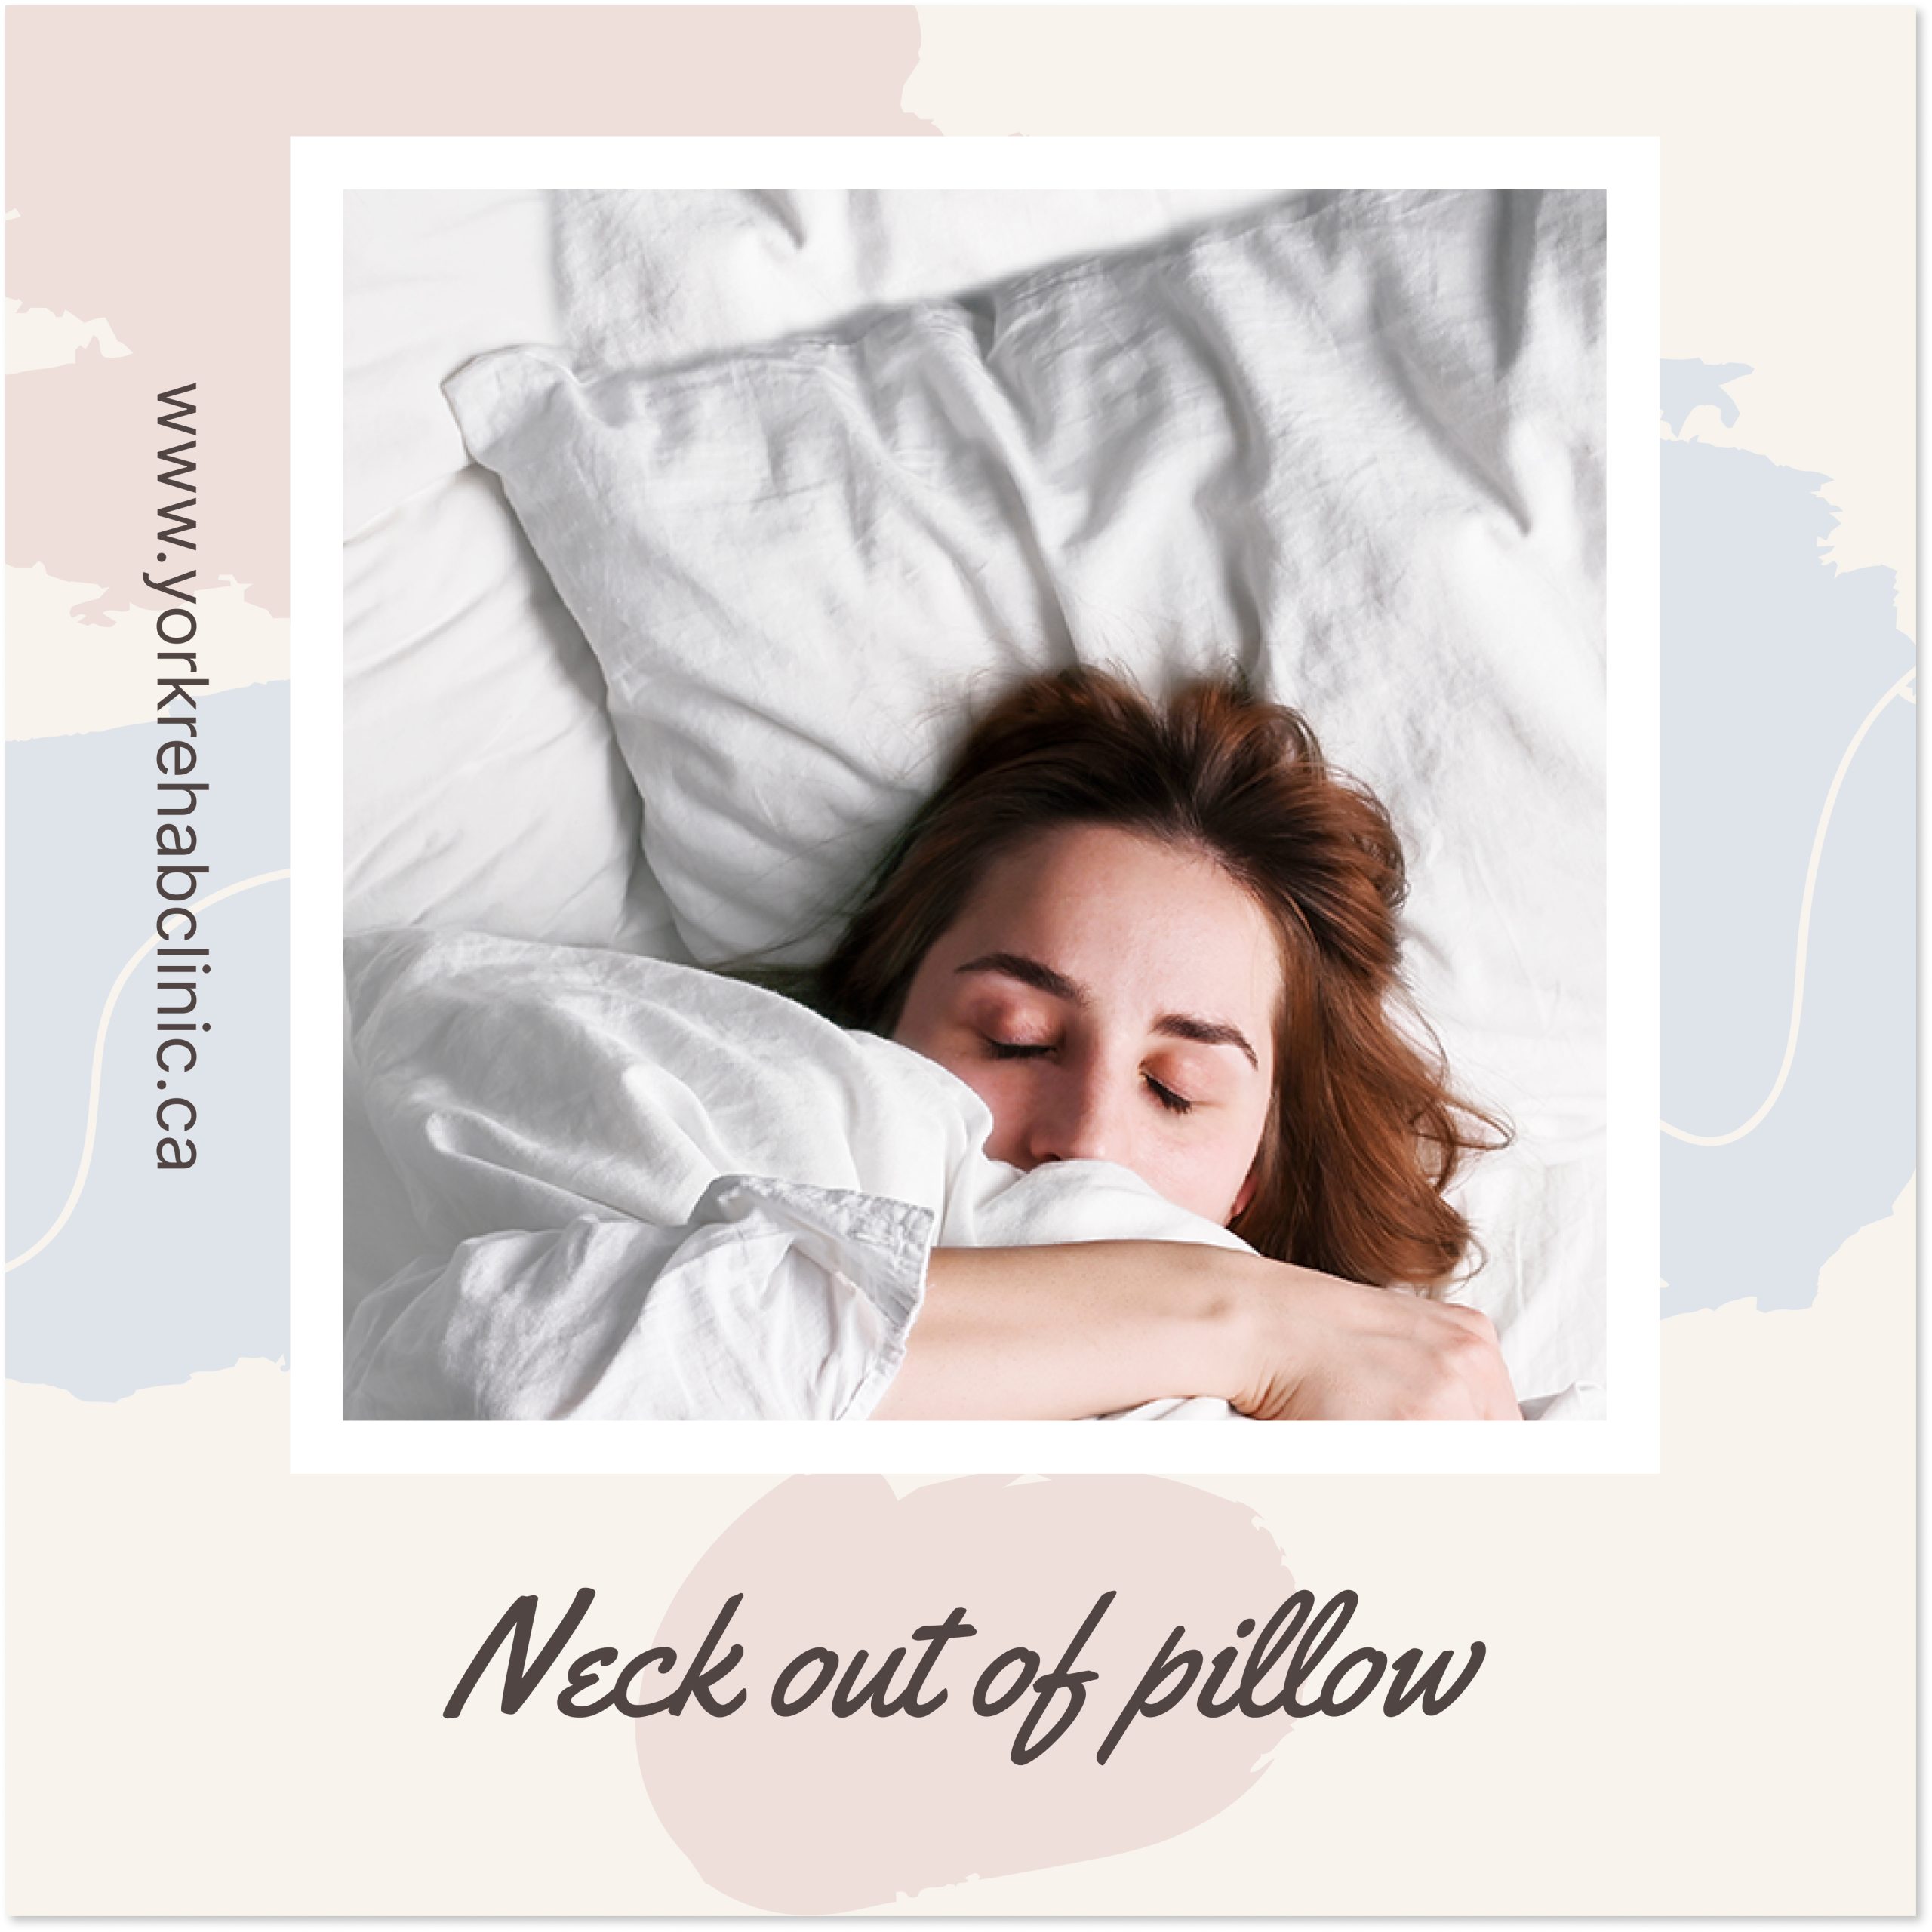 Neck out of pillow